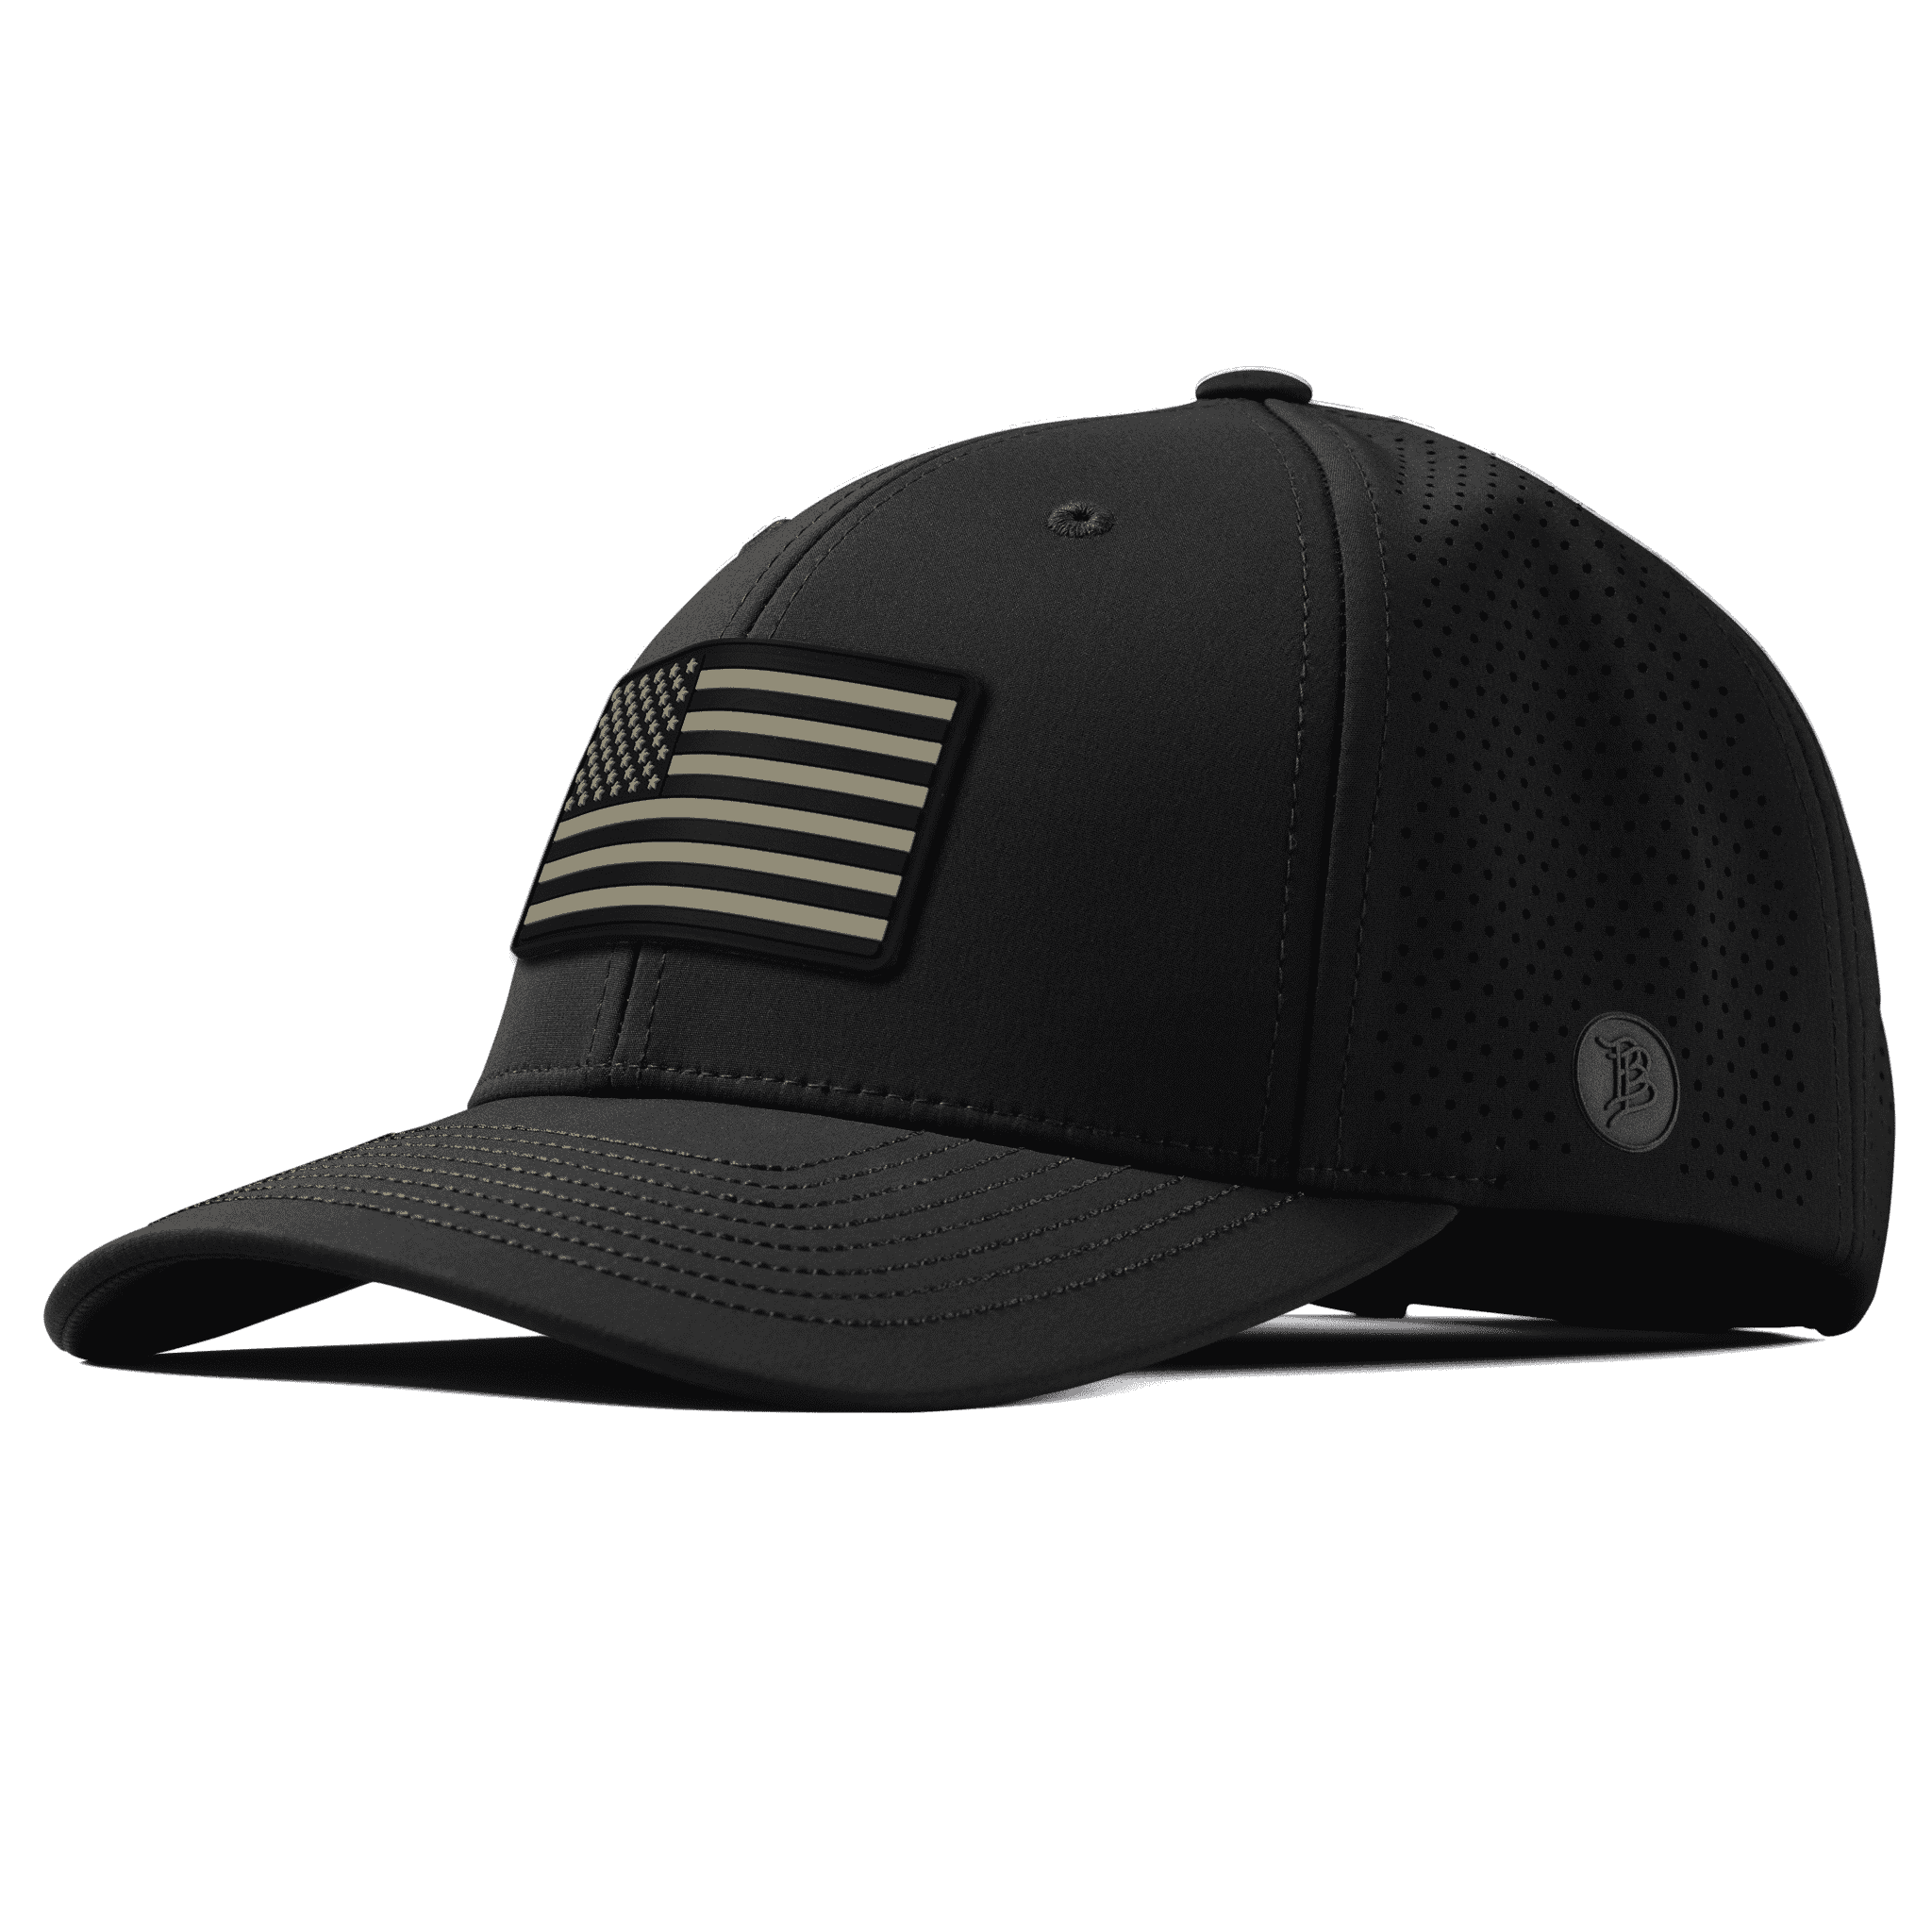 Old Glory Charcoal Elite Curved Front Black